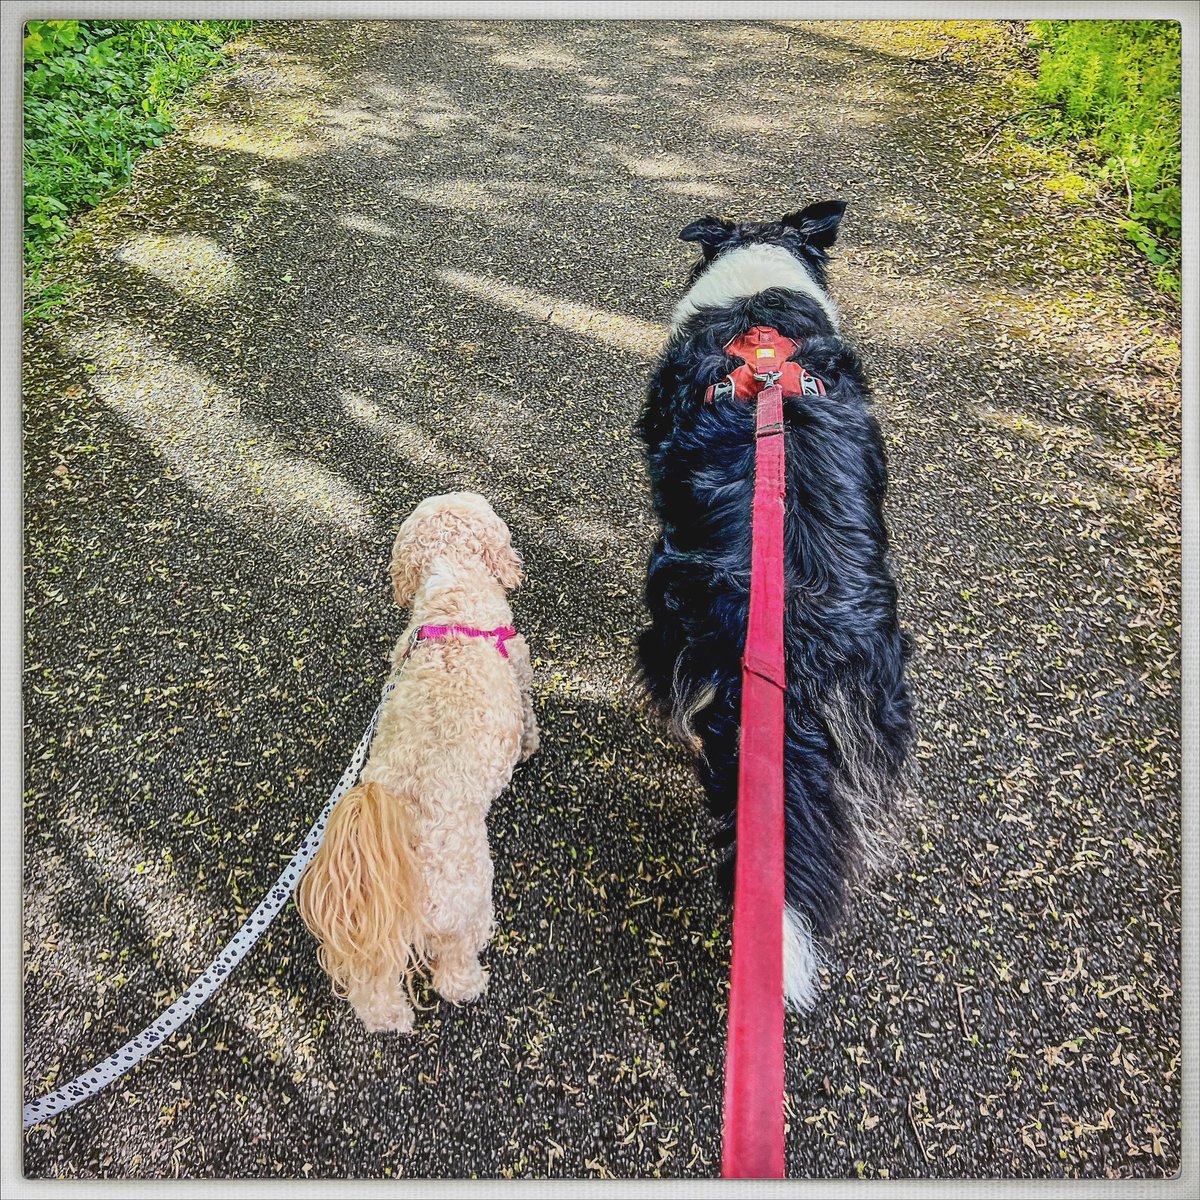 Day 119/366 #photoaday Rigby loves going running with me, but sometimes, he just wants to go for a stroll with his mate. #photooftheday #dogs